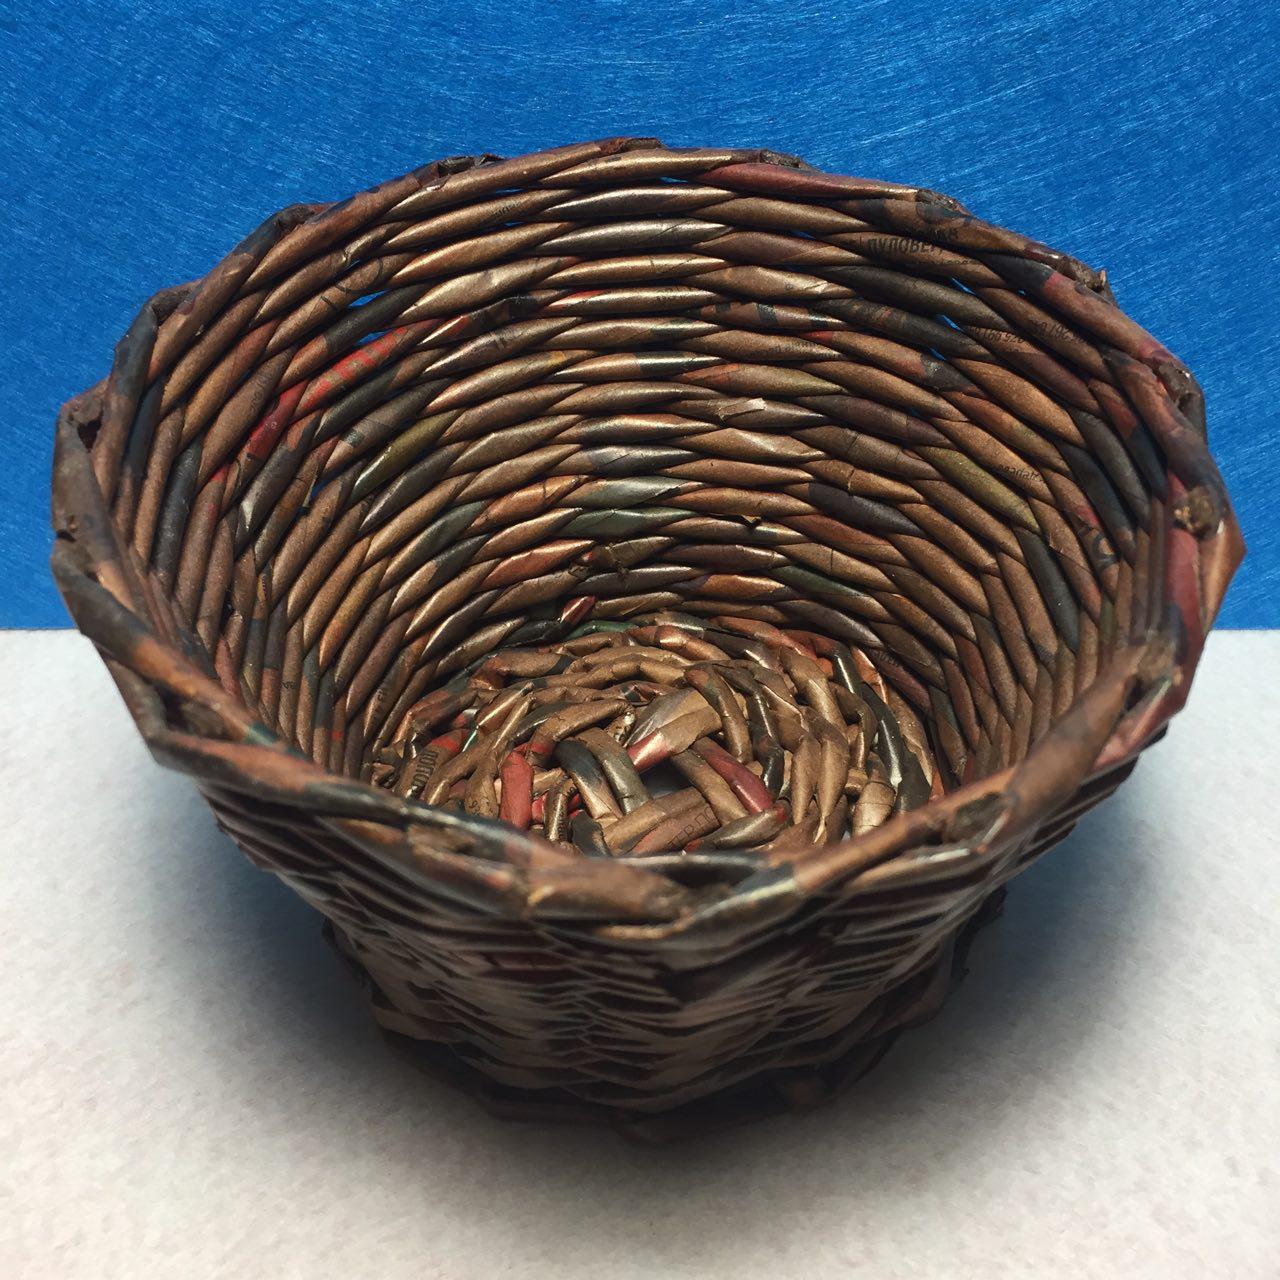 Baskets, bases for bouquets